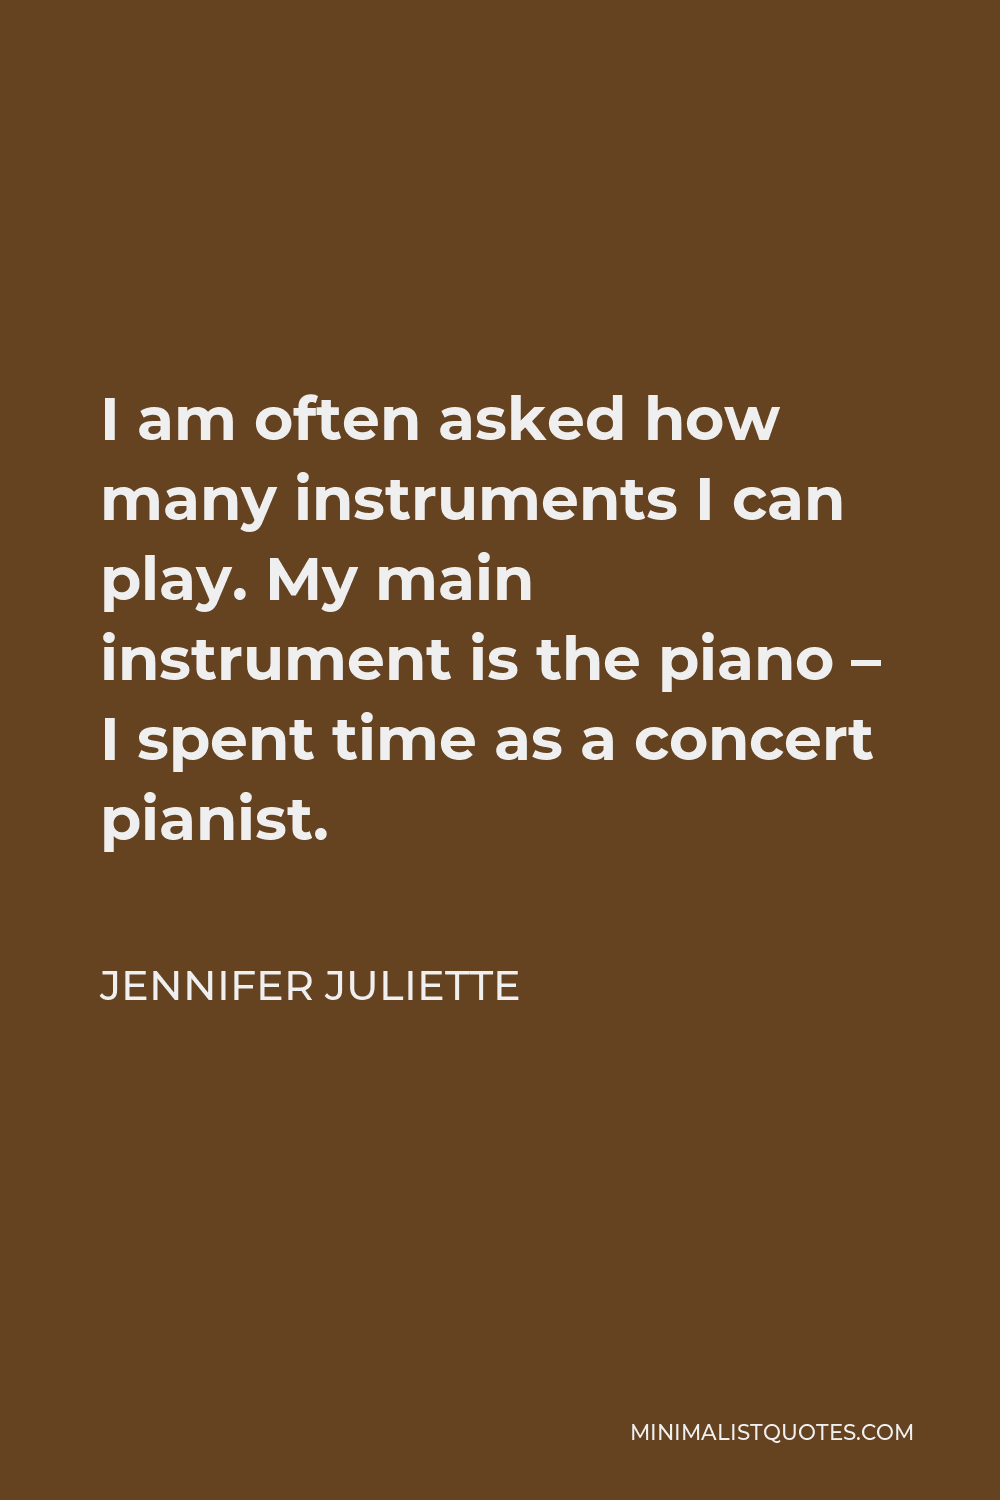 Jennifer Juliette Quote - I am often asked how many instruments I can play. My main instrument is the piano – I spent time as a concert pianist.